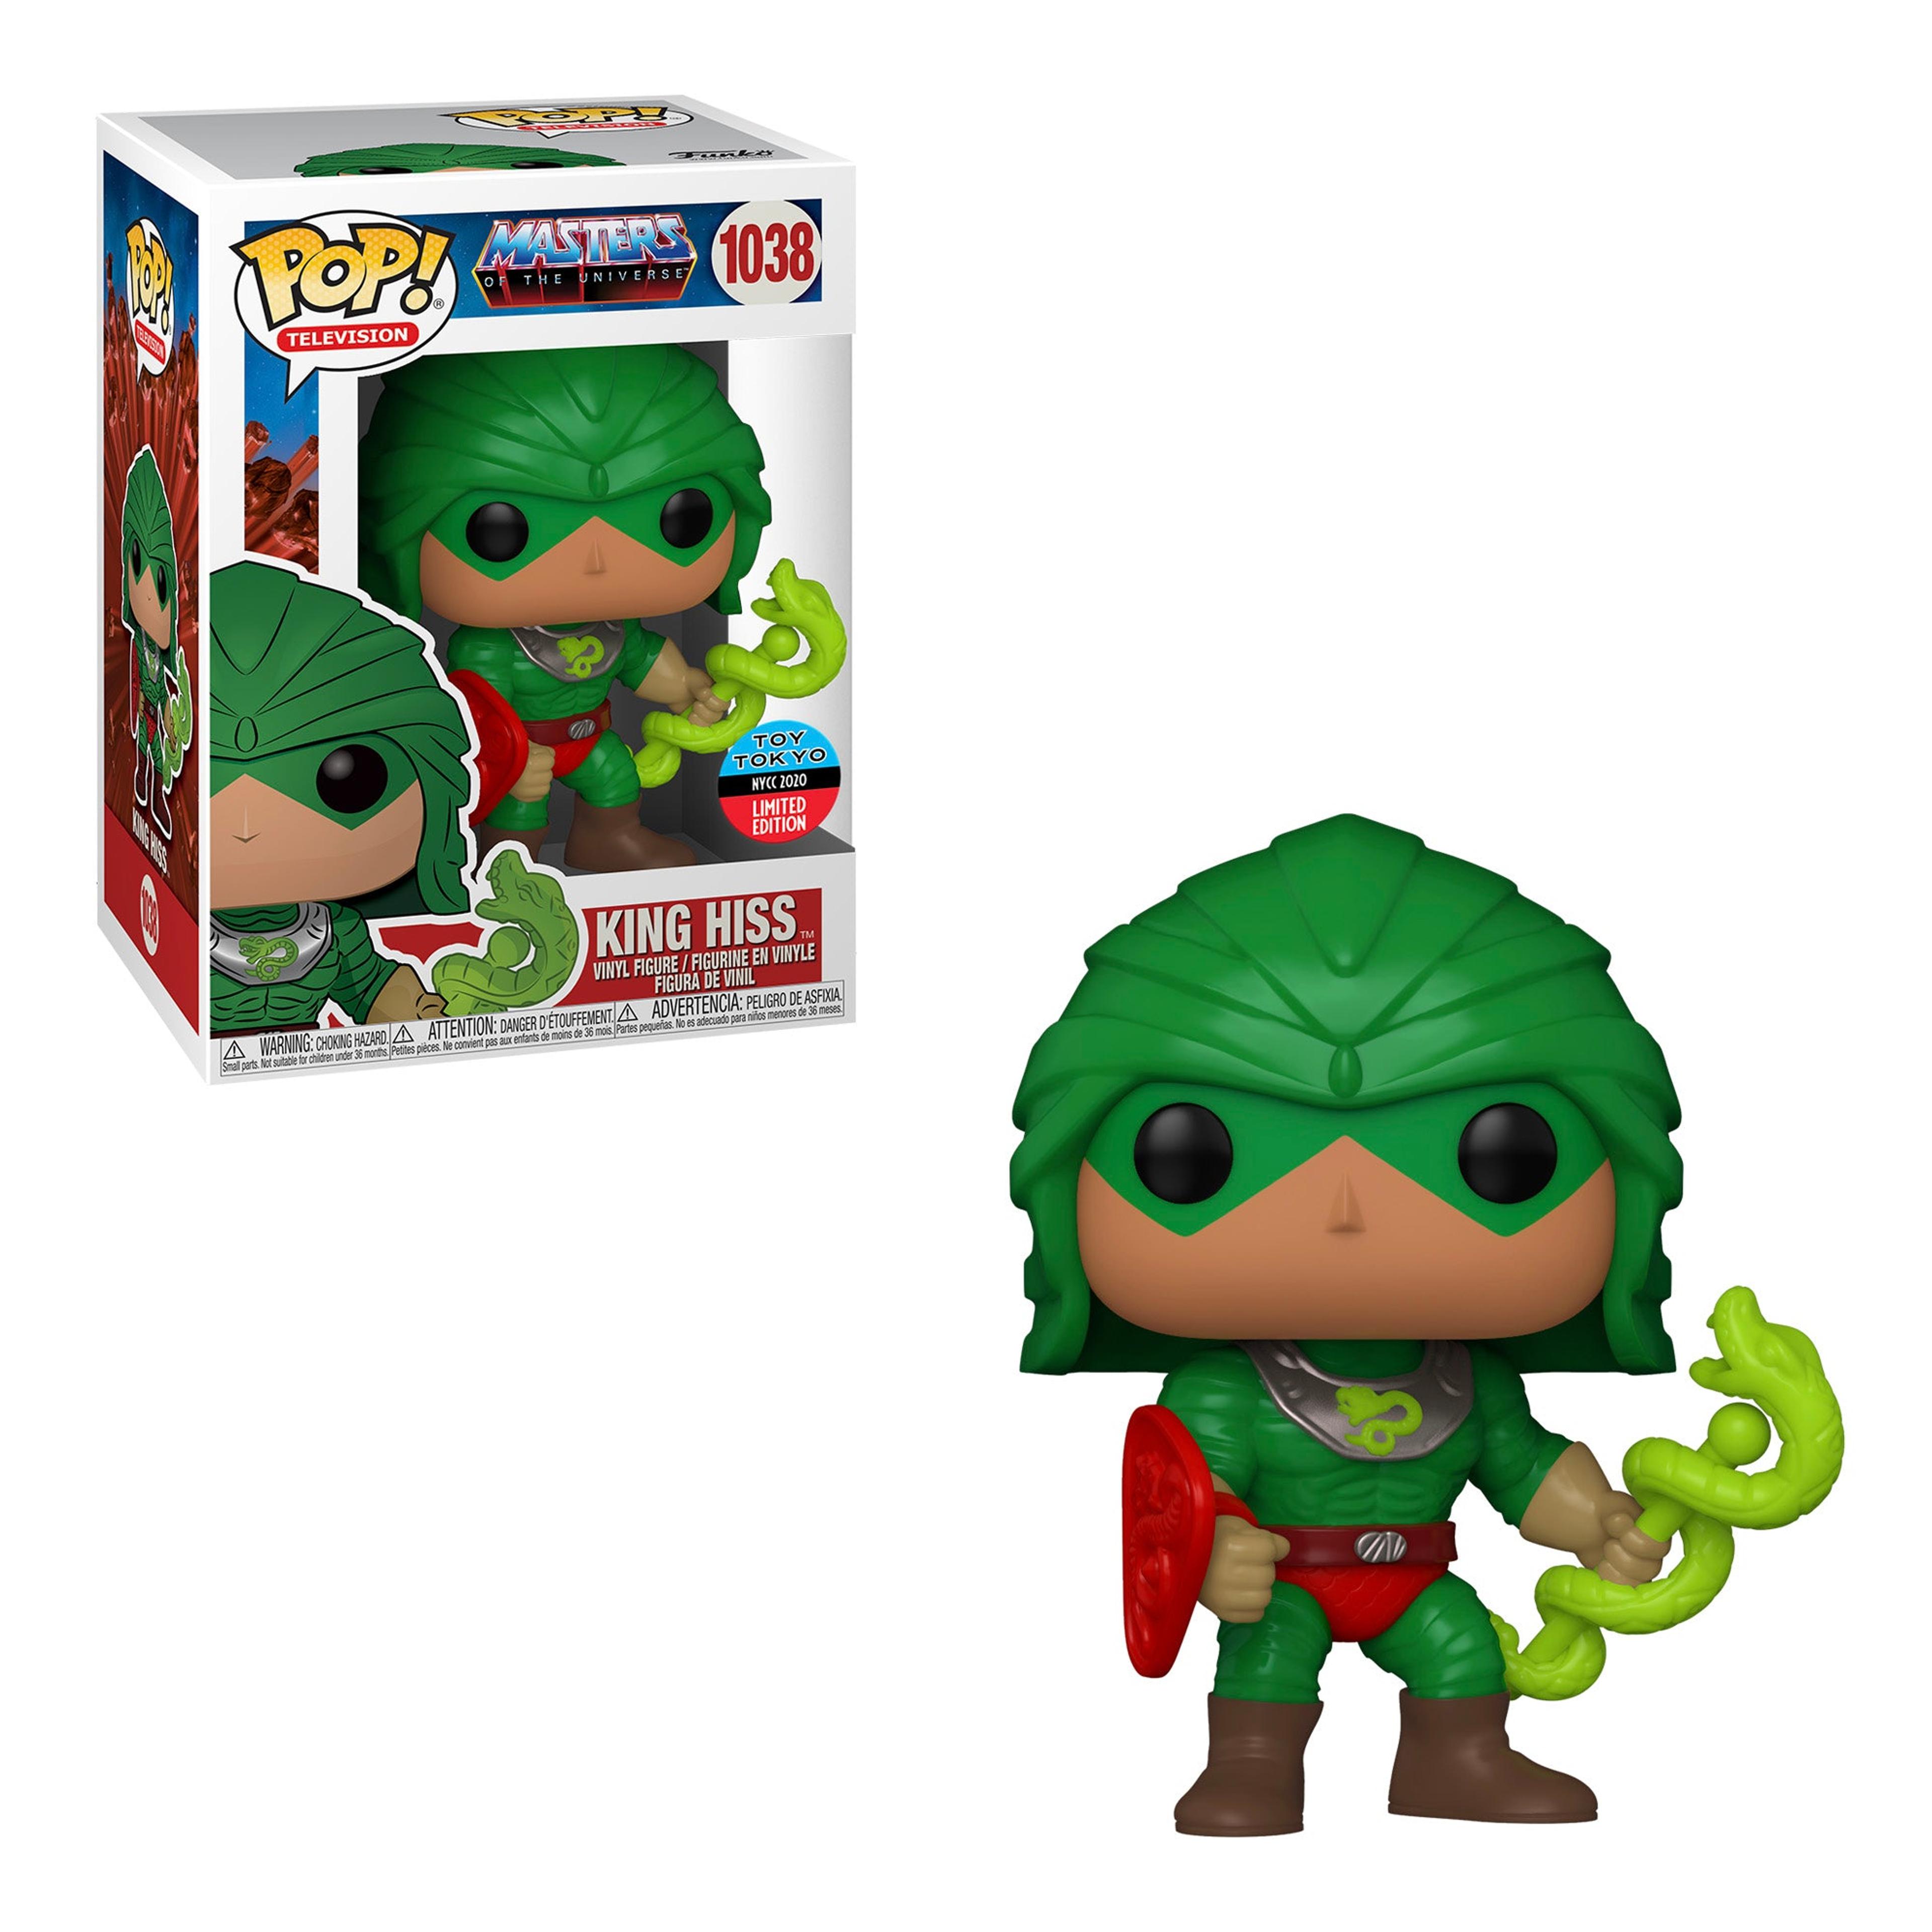 Funko Pop! Television: Masters of the Universe - King Hiss #1038